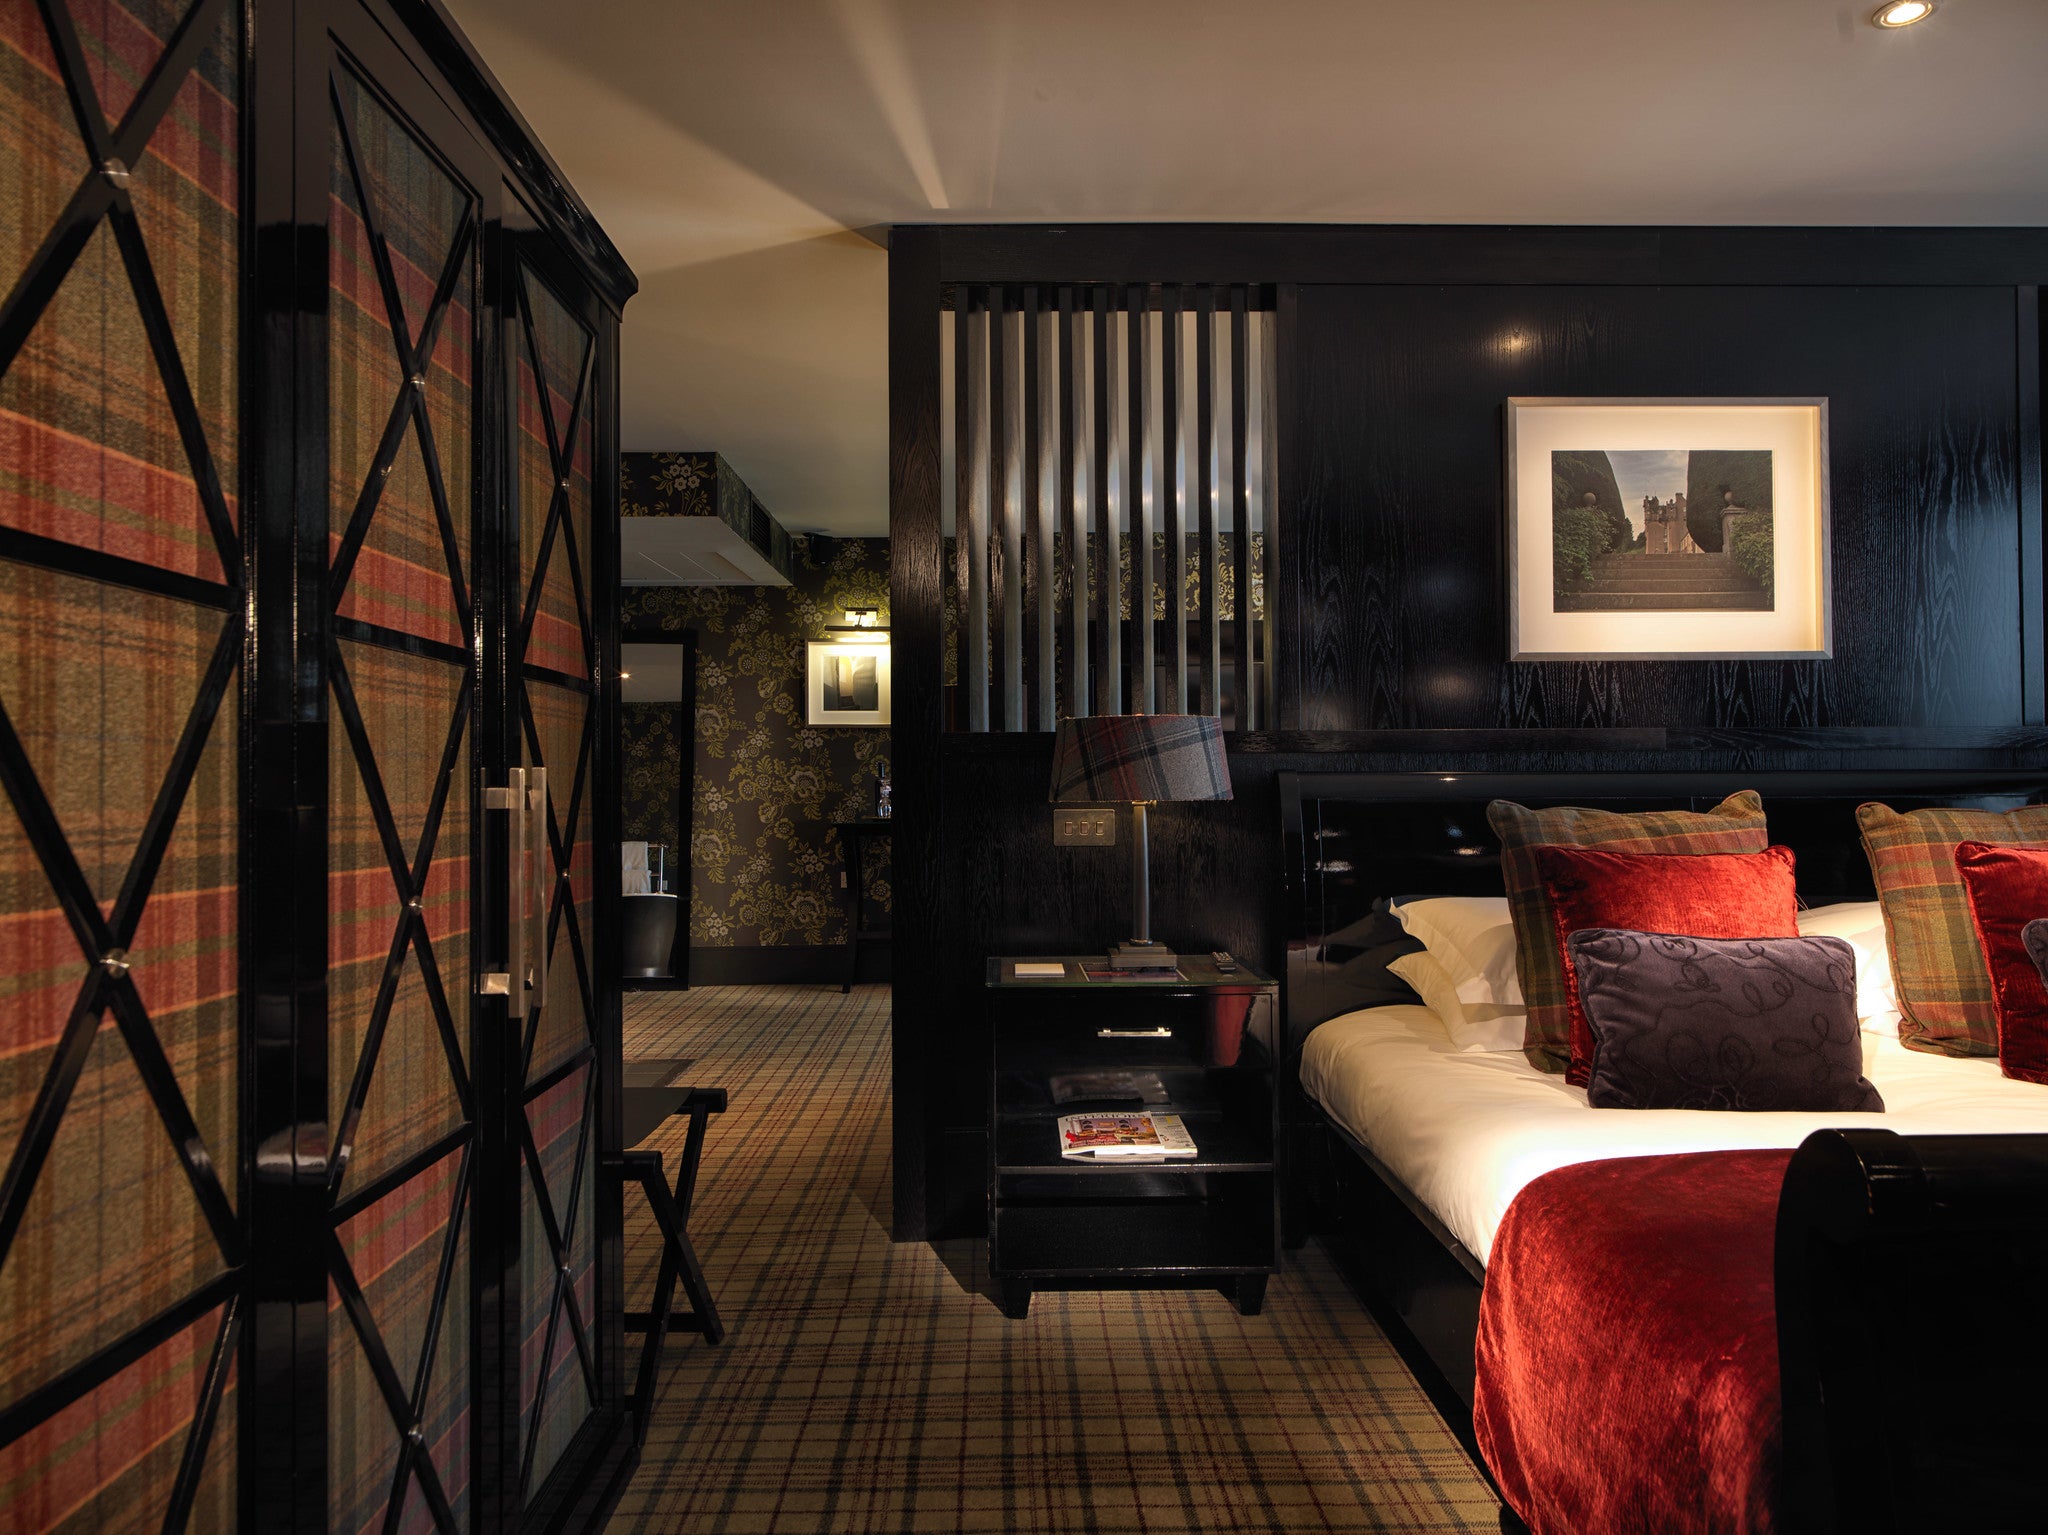 Malmaison Aberdeen has sumptuous style with plenty of bars and restaurants nearby